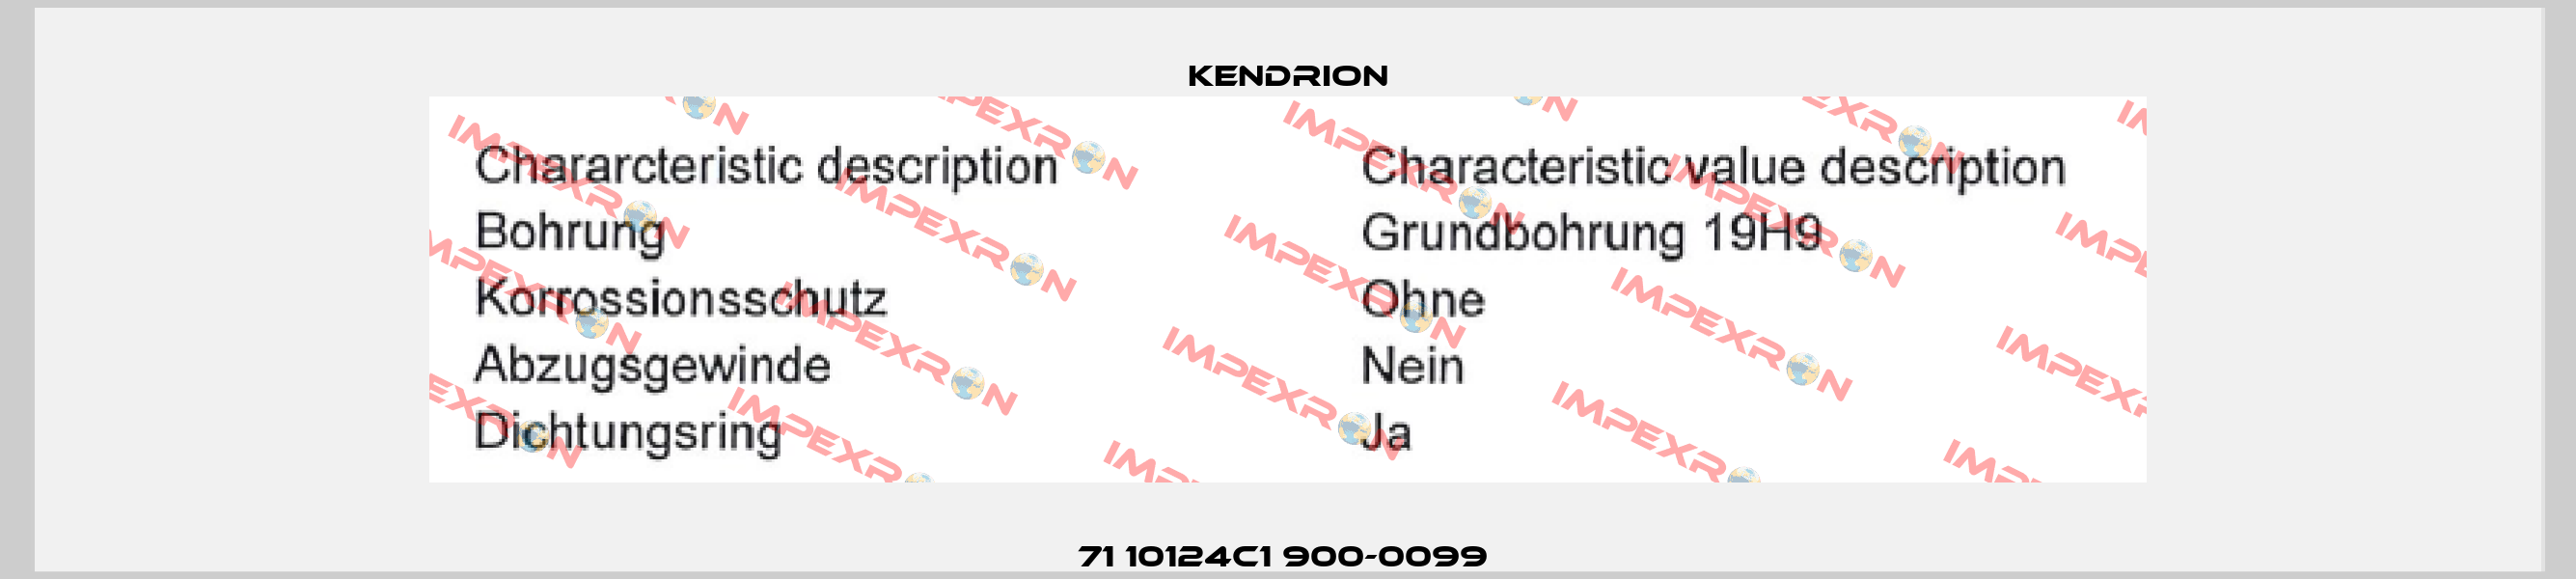 71 10124C1 900-0099  Kendrion